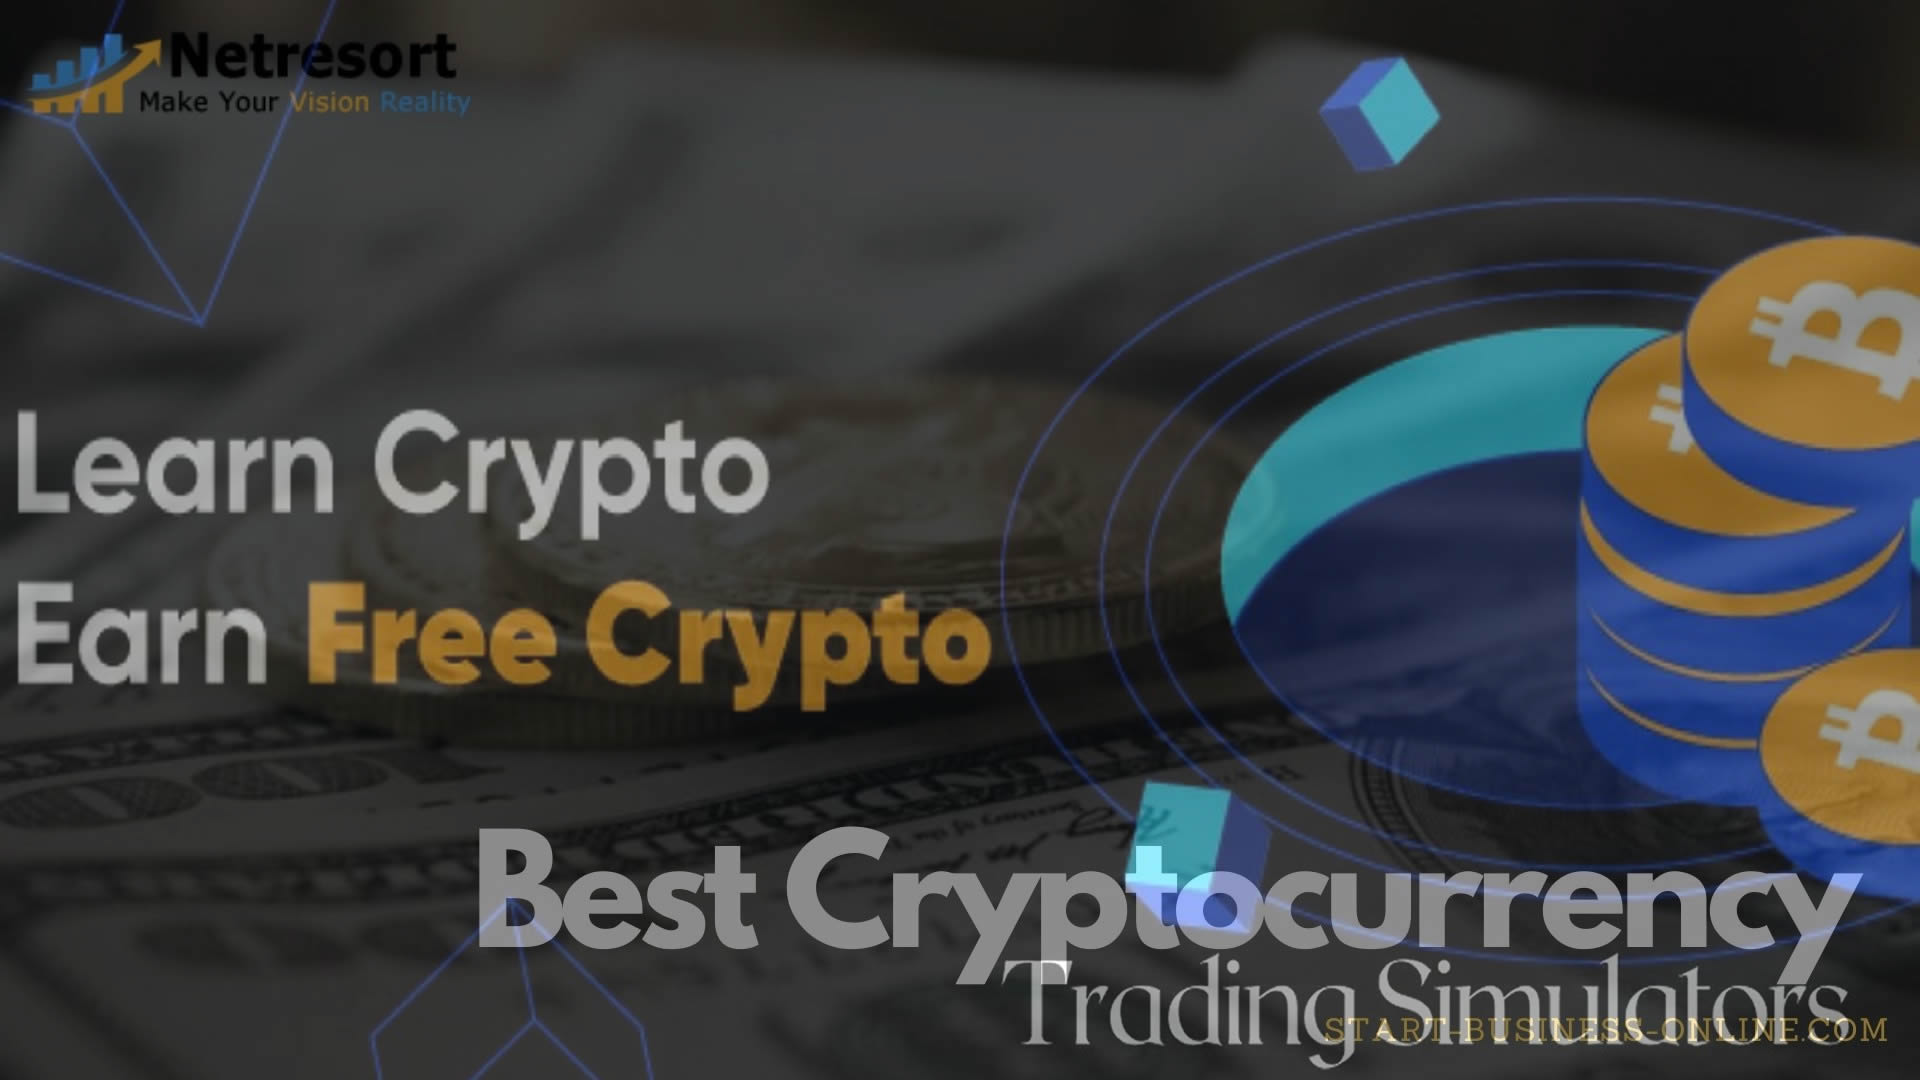 A trusted guide to the Best Cryptocurrency Trading Simulators